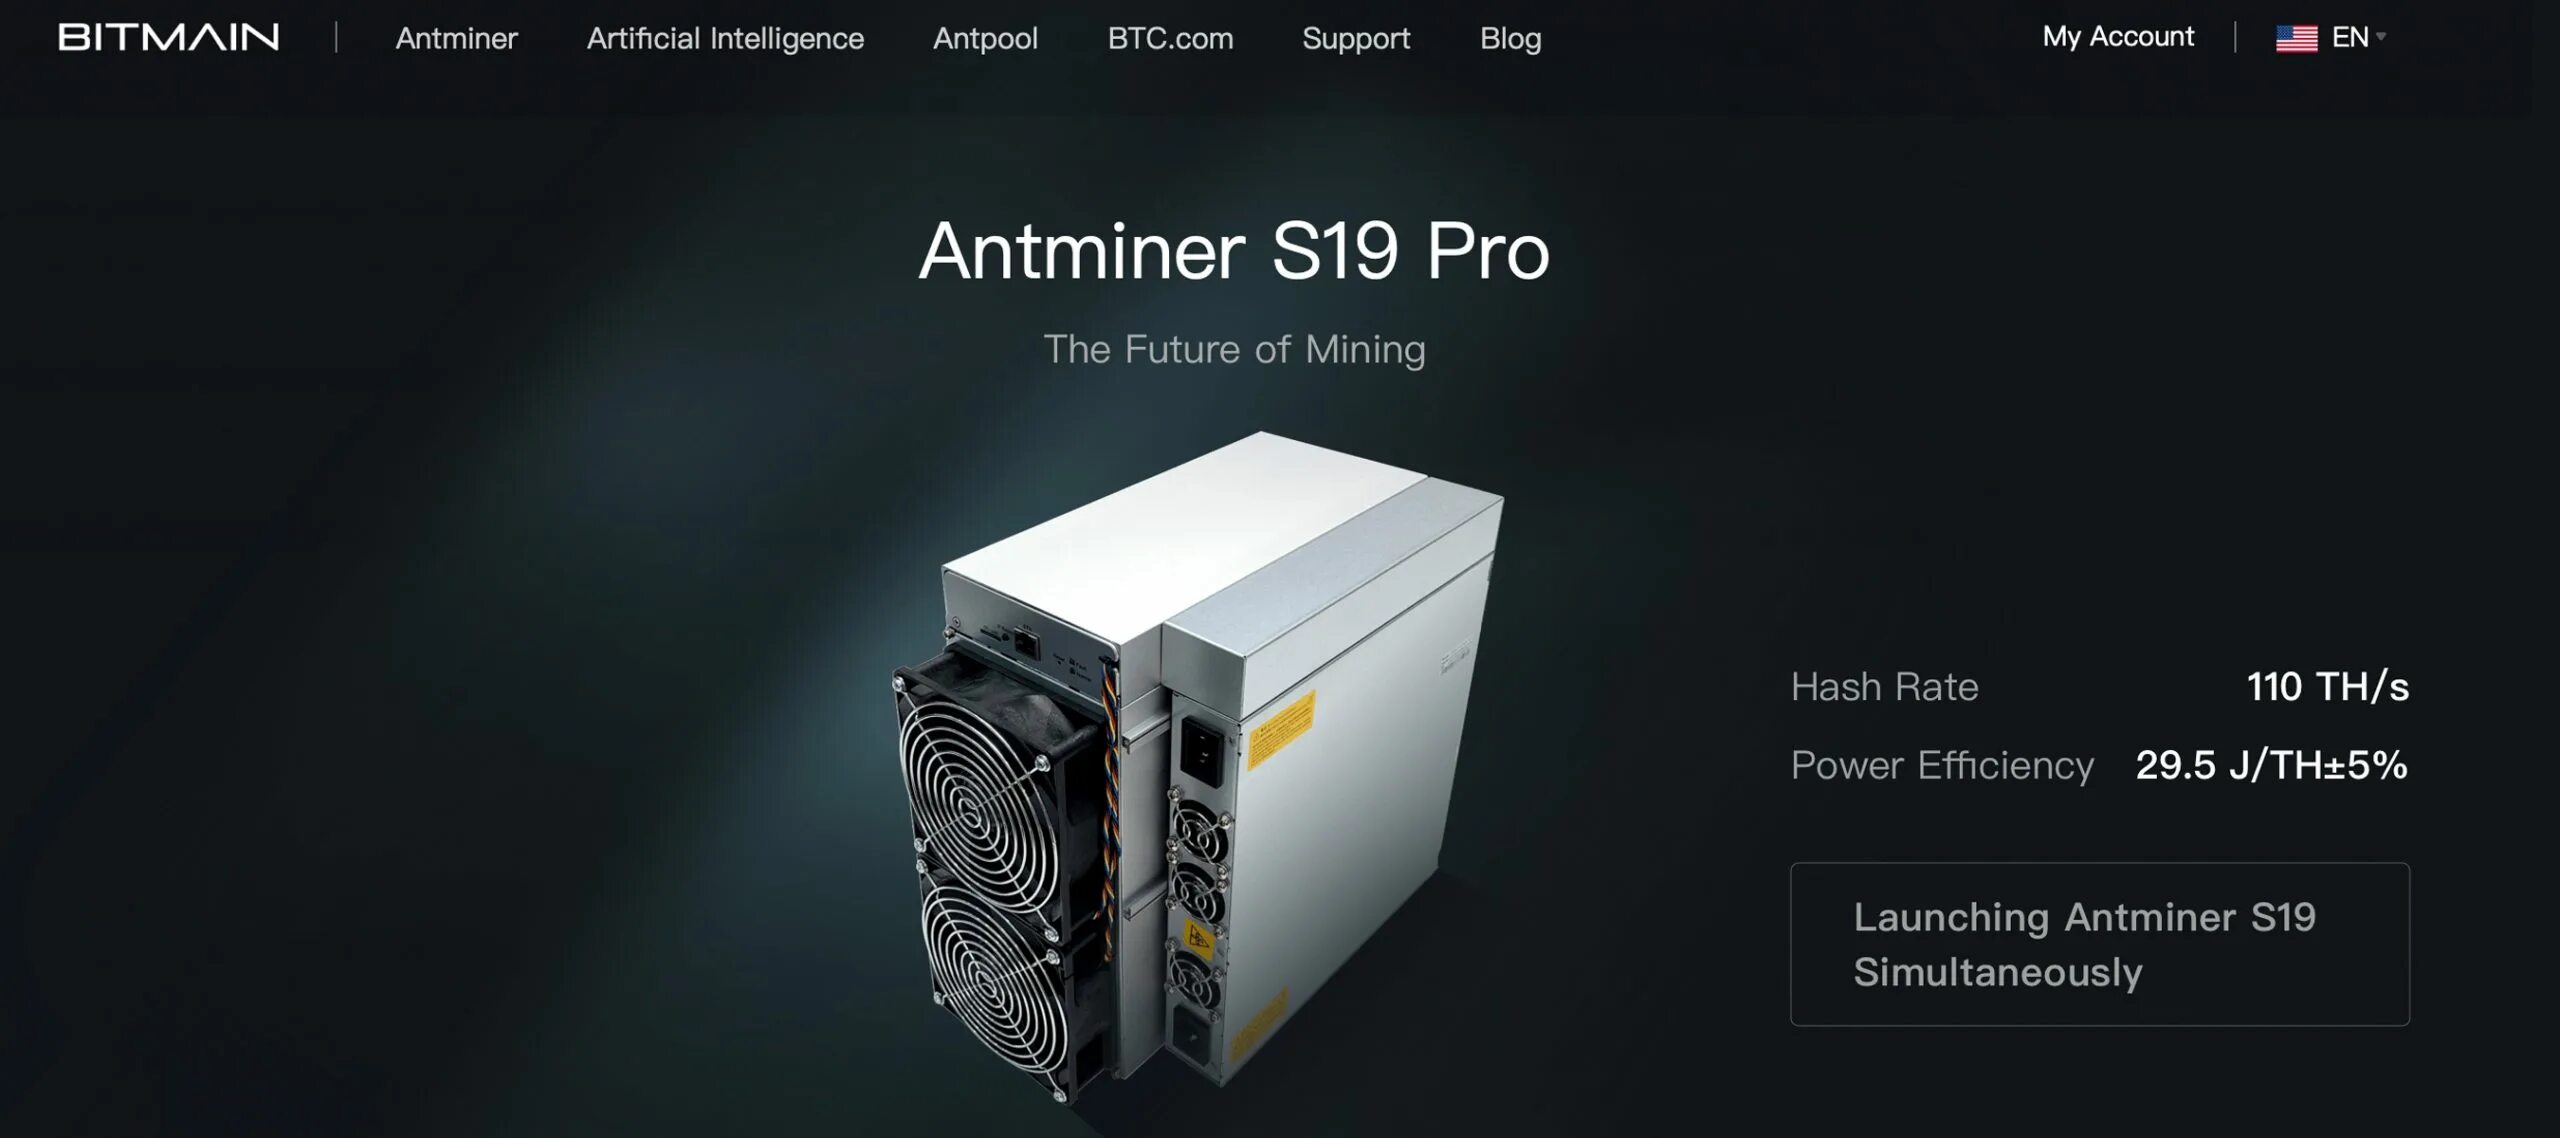 Asic s19 pro. Bitmain Antminer s19 Pro 110th/s. Antminer s19 Pro 110th. Асик Antminer s19 Pro 110 th. Antminer s19 90 th/s.